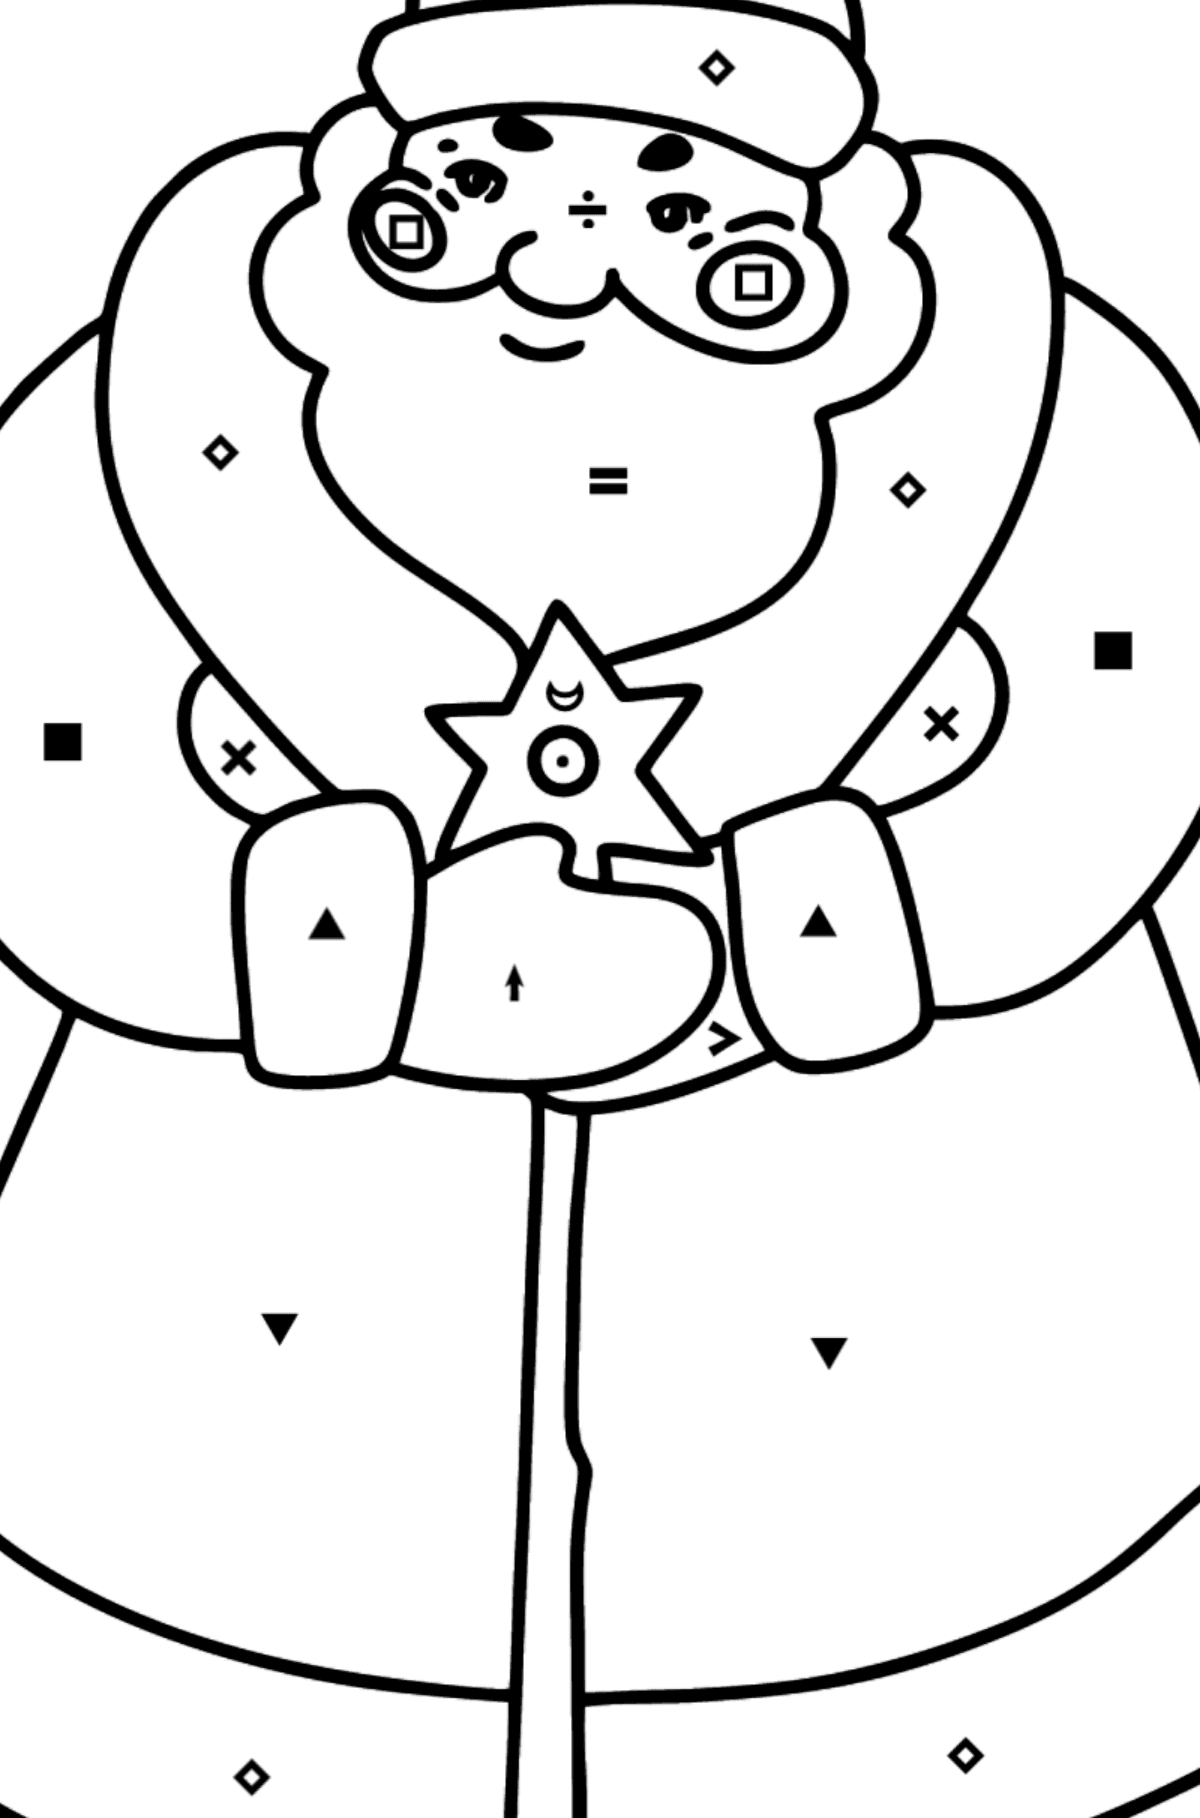 Good Father Frost coloring page - Coloring by Symbols for Kids